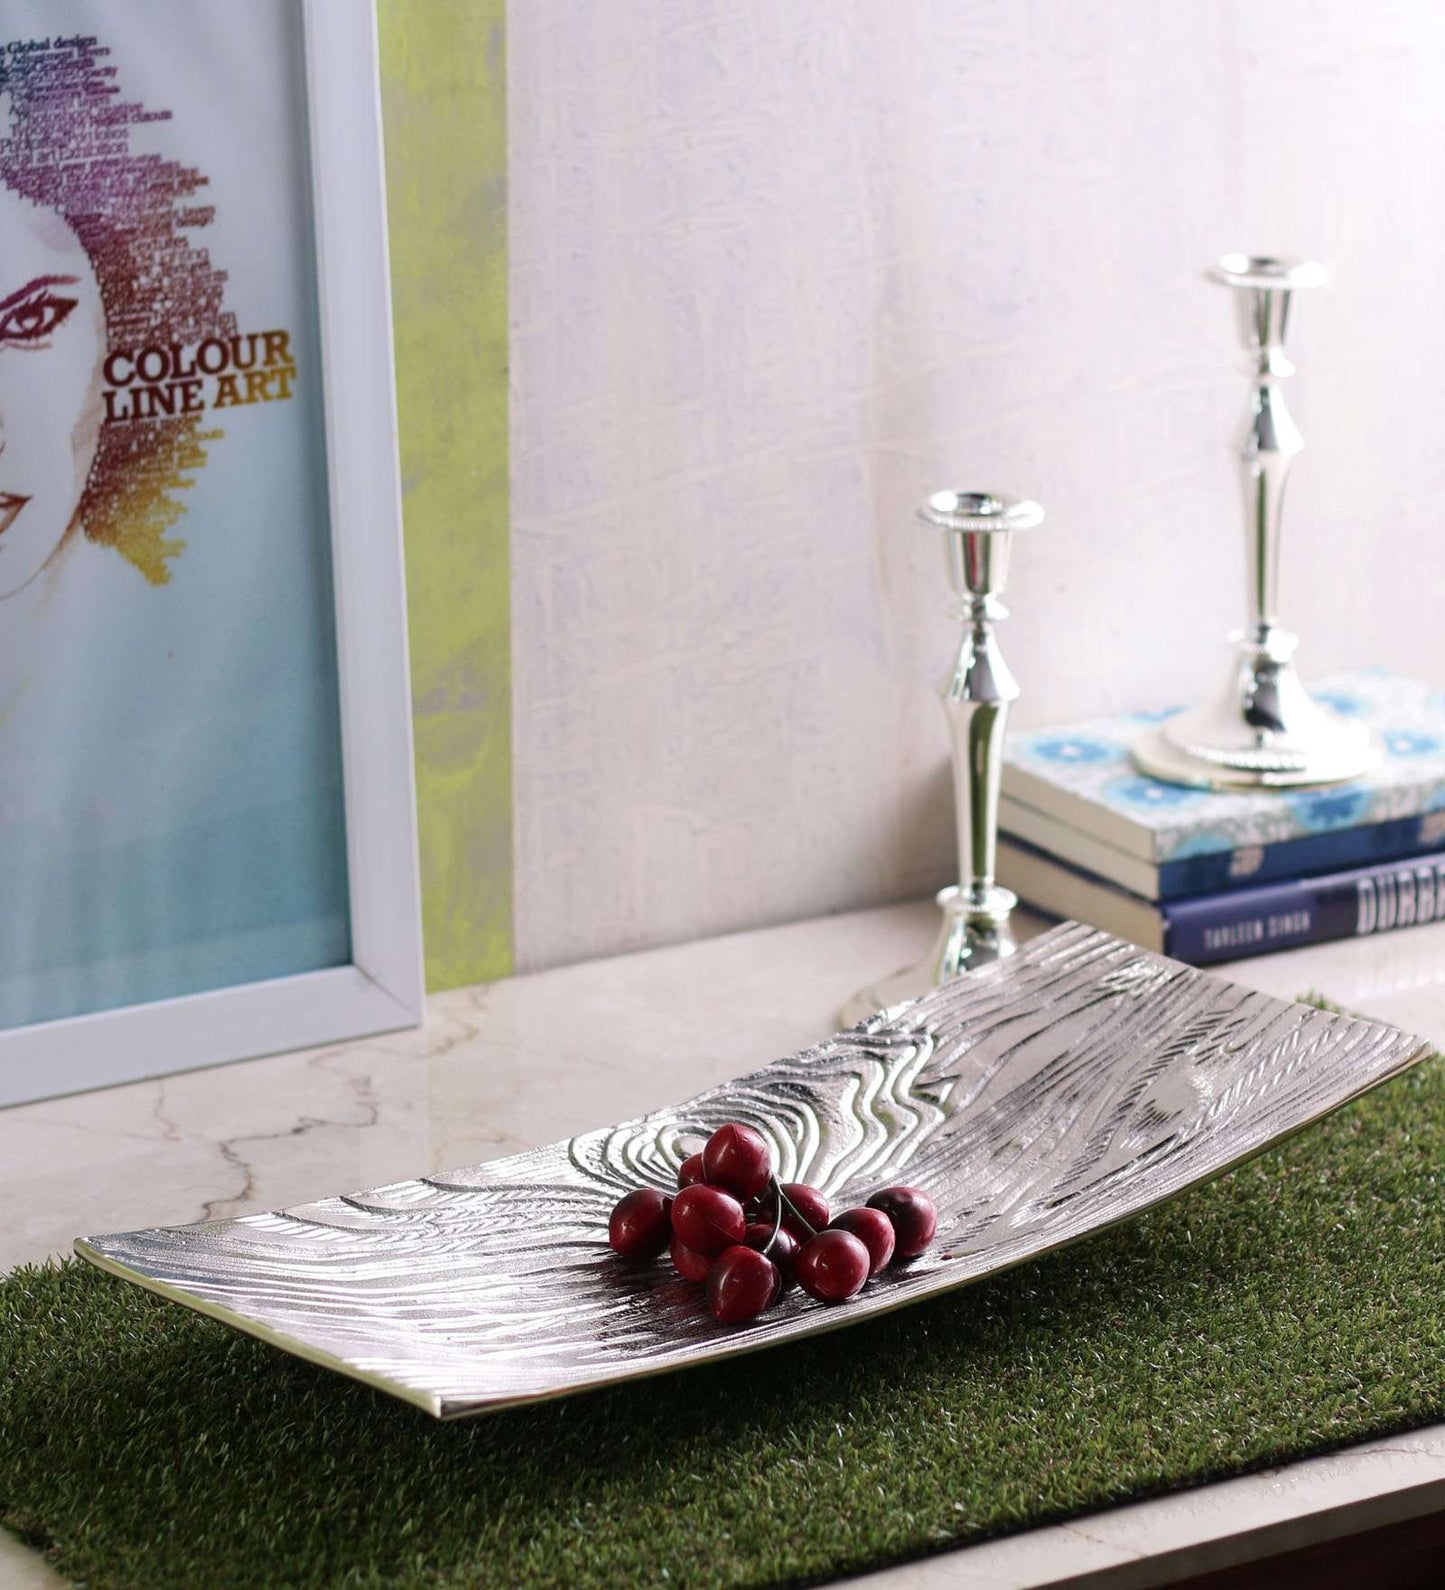 SWHF Pure White Metal Serving and Decorative Tray - SWHF